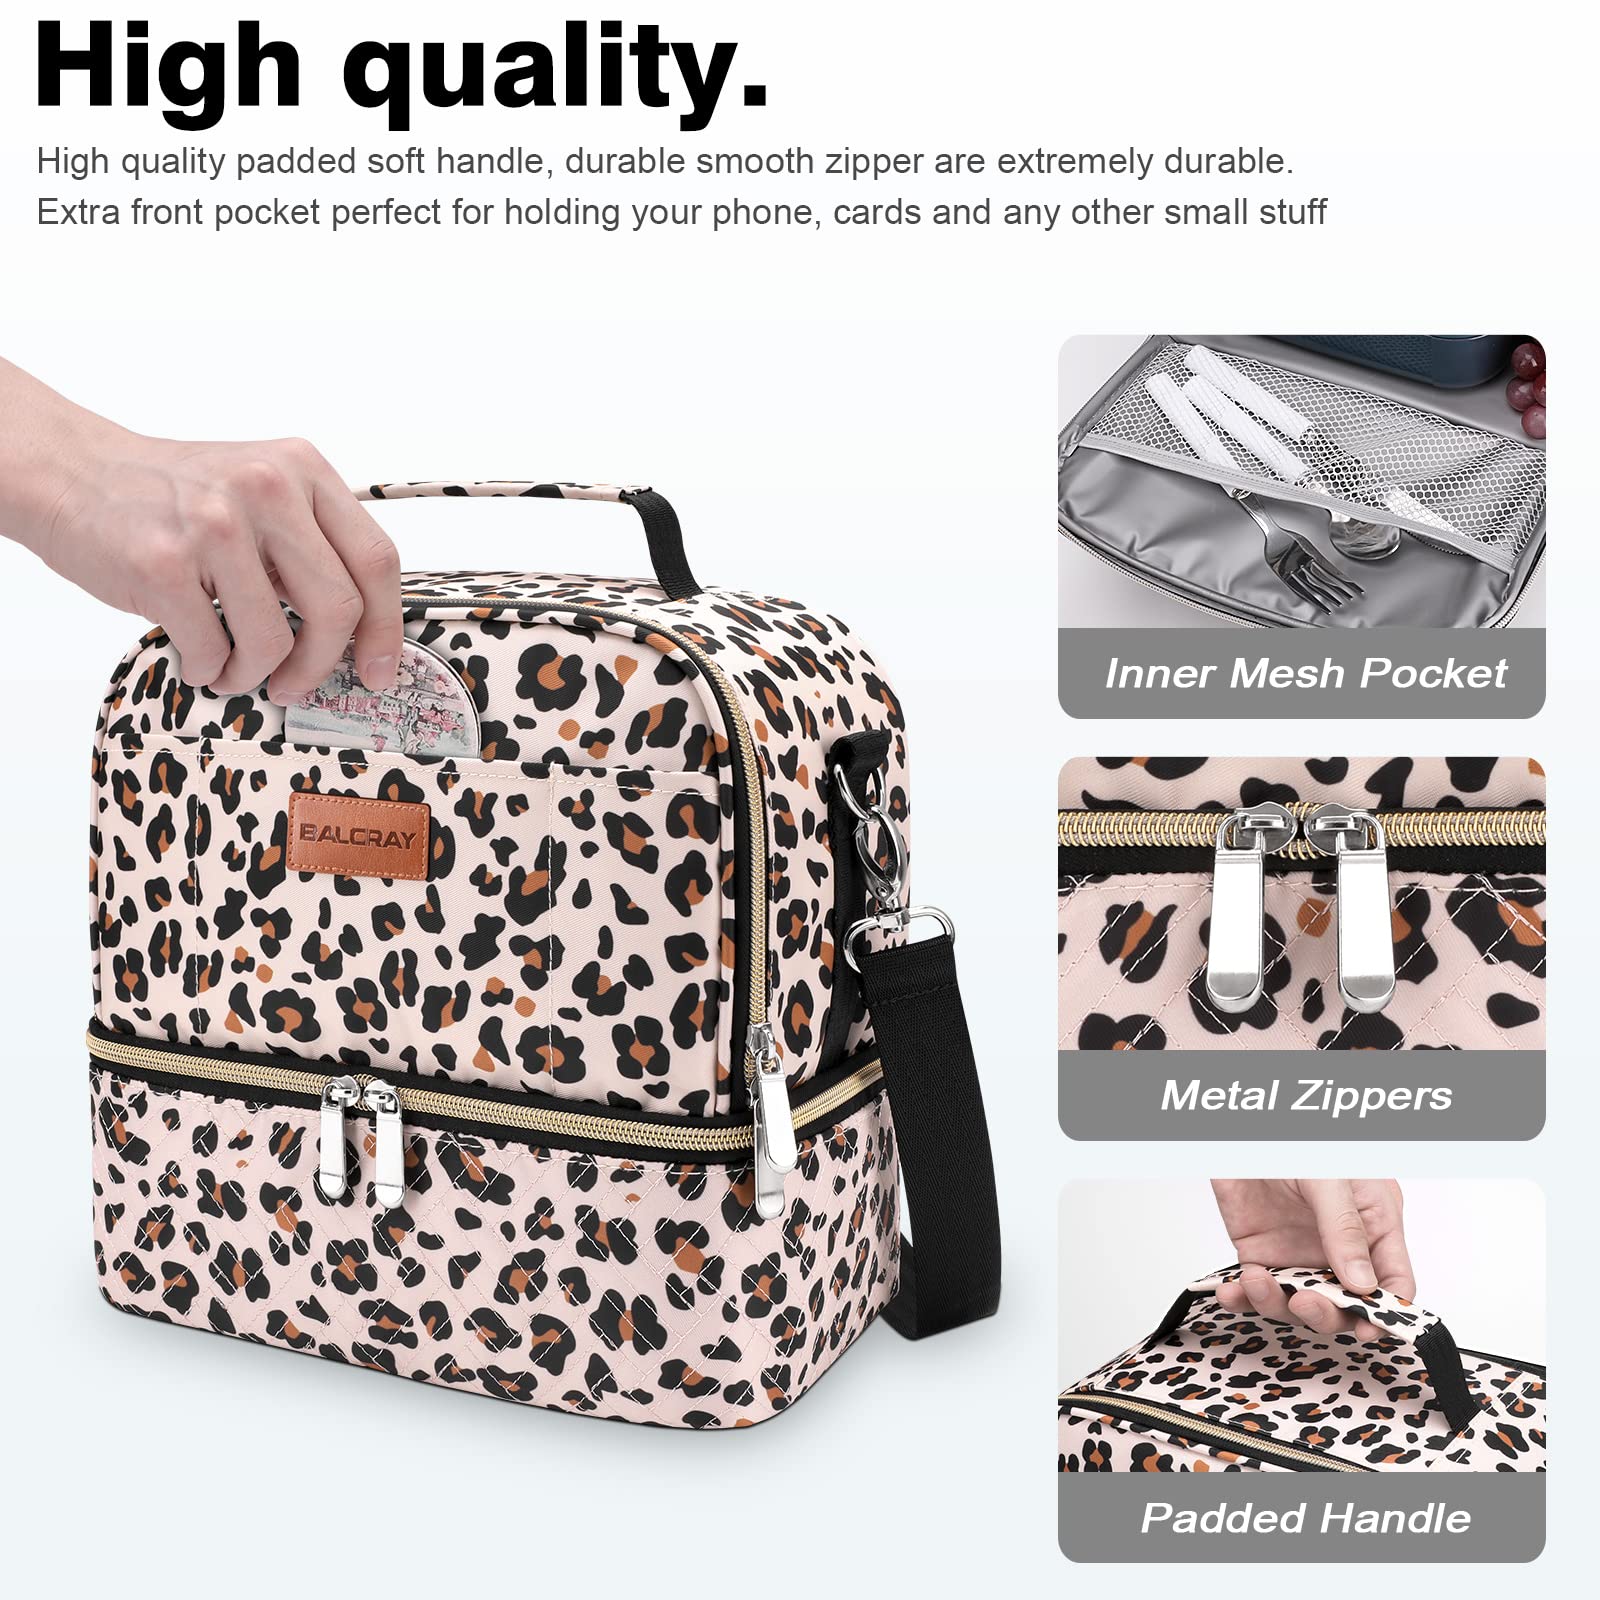 BALORAY Lunch Bag Women Men, Double Deck Lunch Box Insulated Lunch Bag for Adults Work Office Picnic, Leakproof Cooler Bag with Adjustable Shoulder Strap